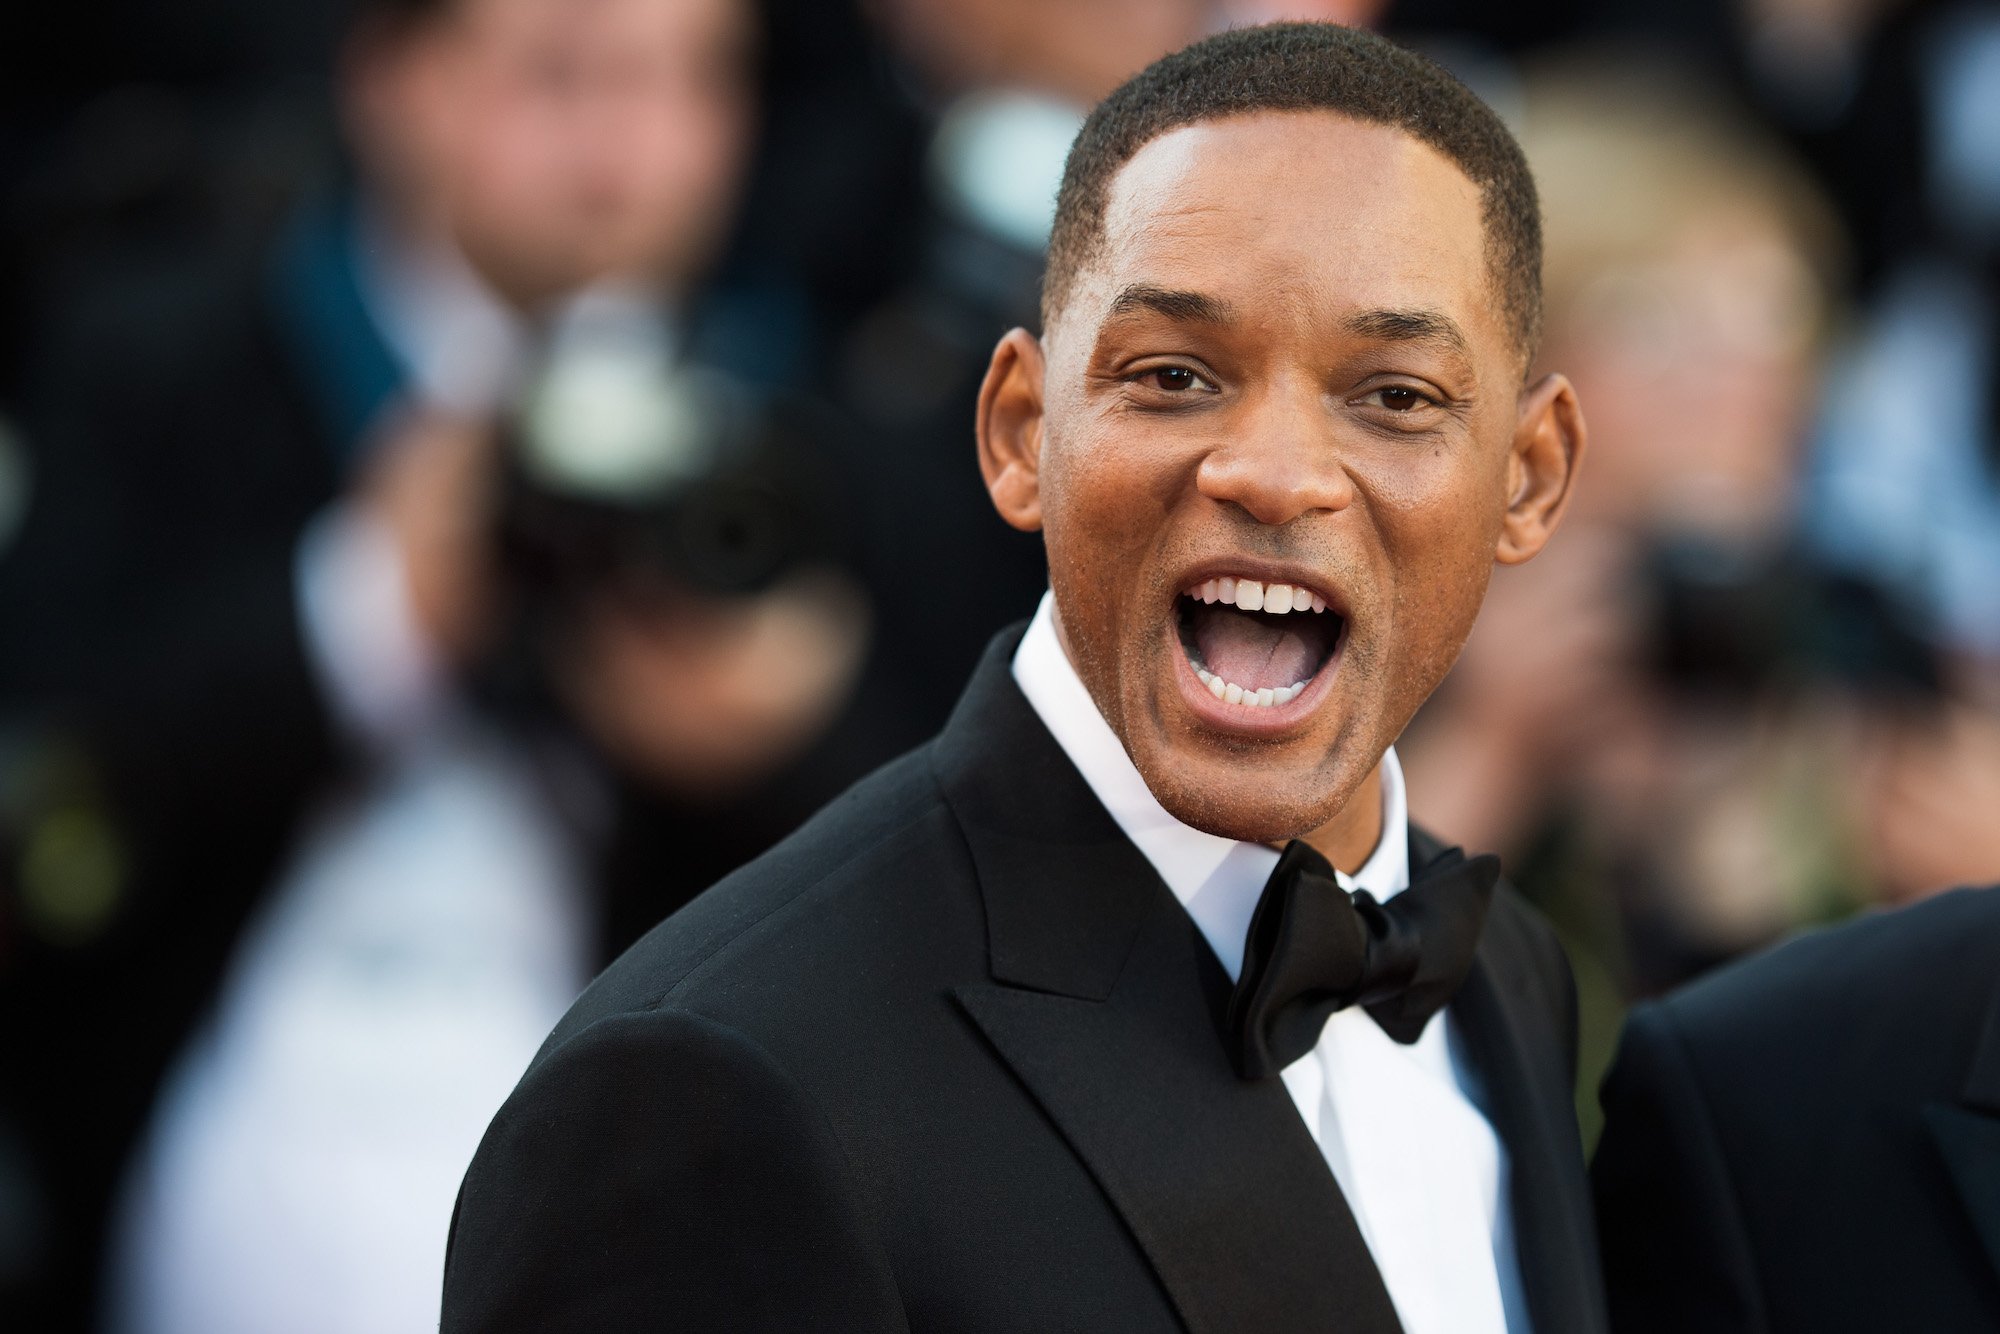 Will Smith smiling open mouthed at the camera